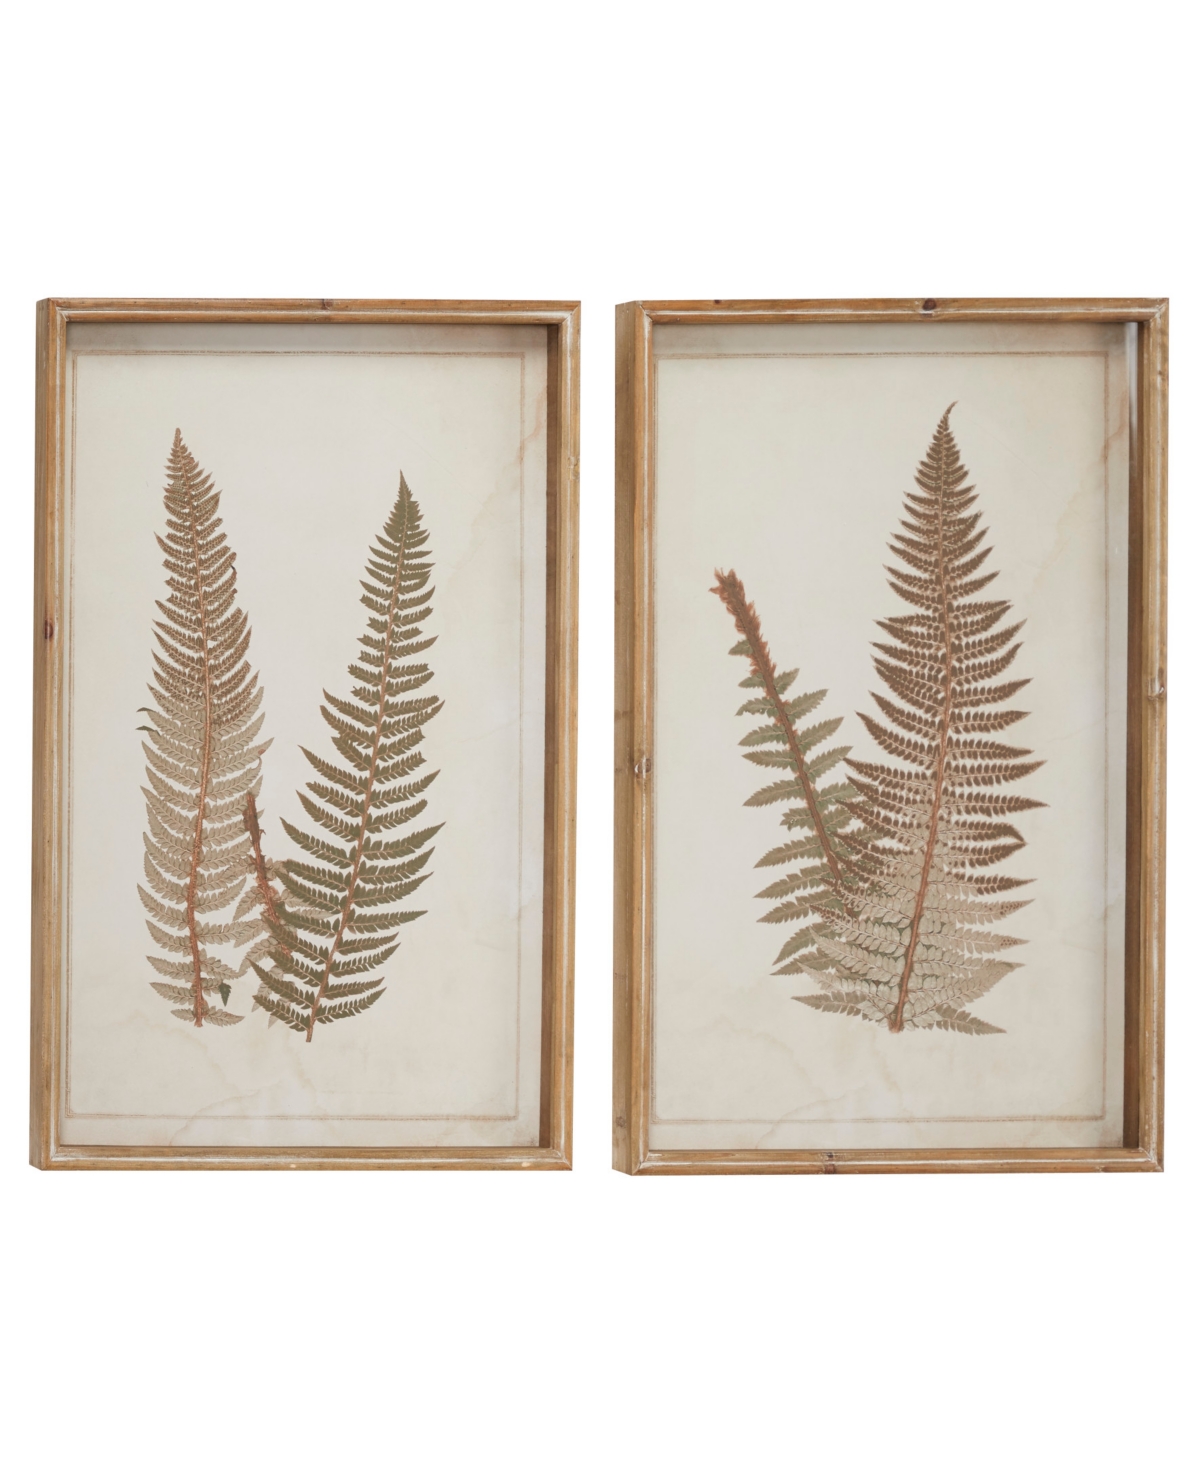 Rosemary Lane Wood Fern Leaf Framed Wall Art With White Backing Set Of 2, 19" X 25" In Brown